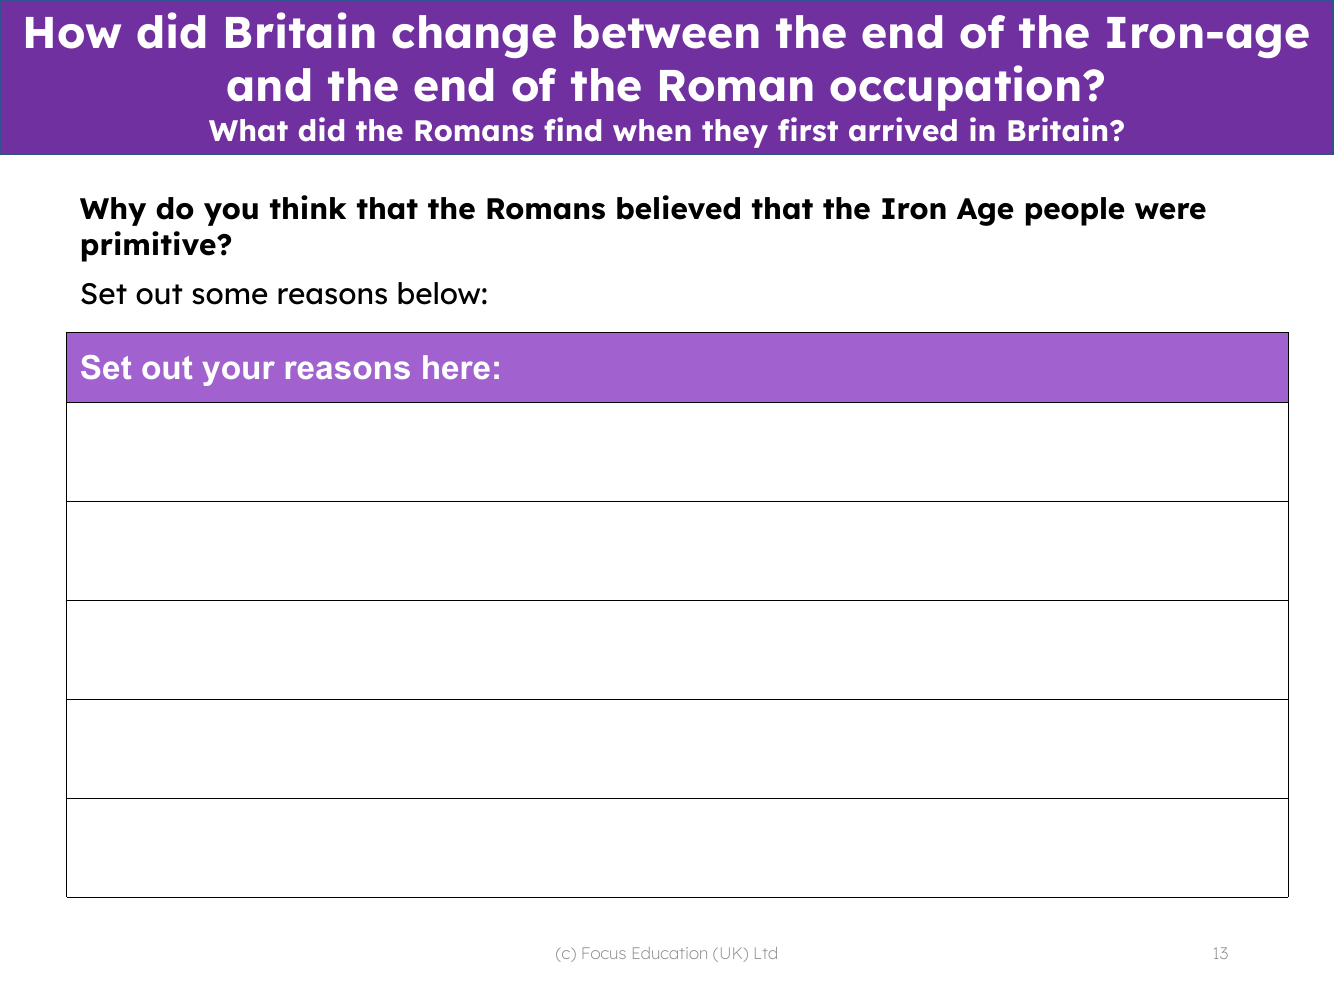 Why do you think the Romans believed that the Iron Age people were primitive? - Worksheet